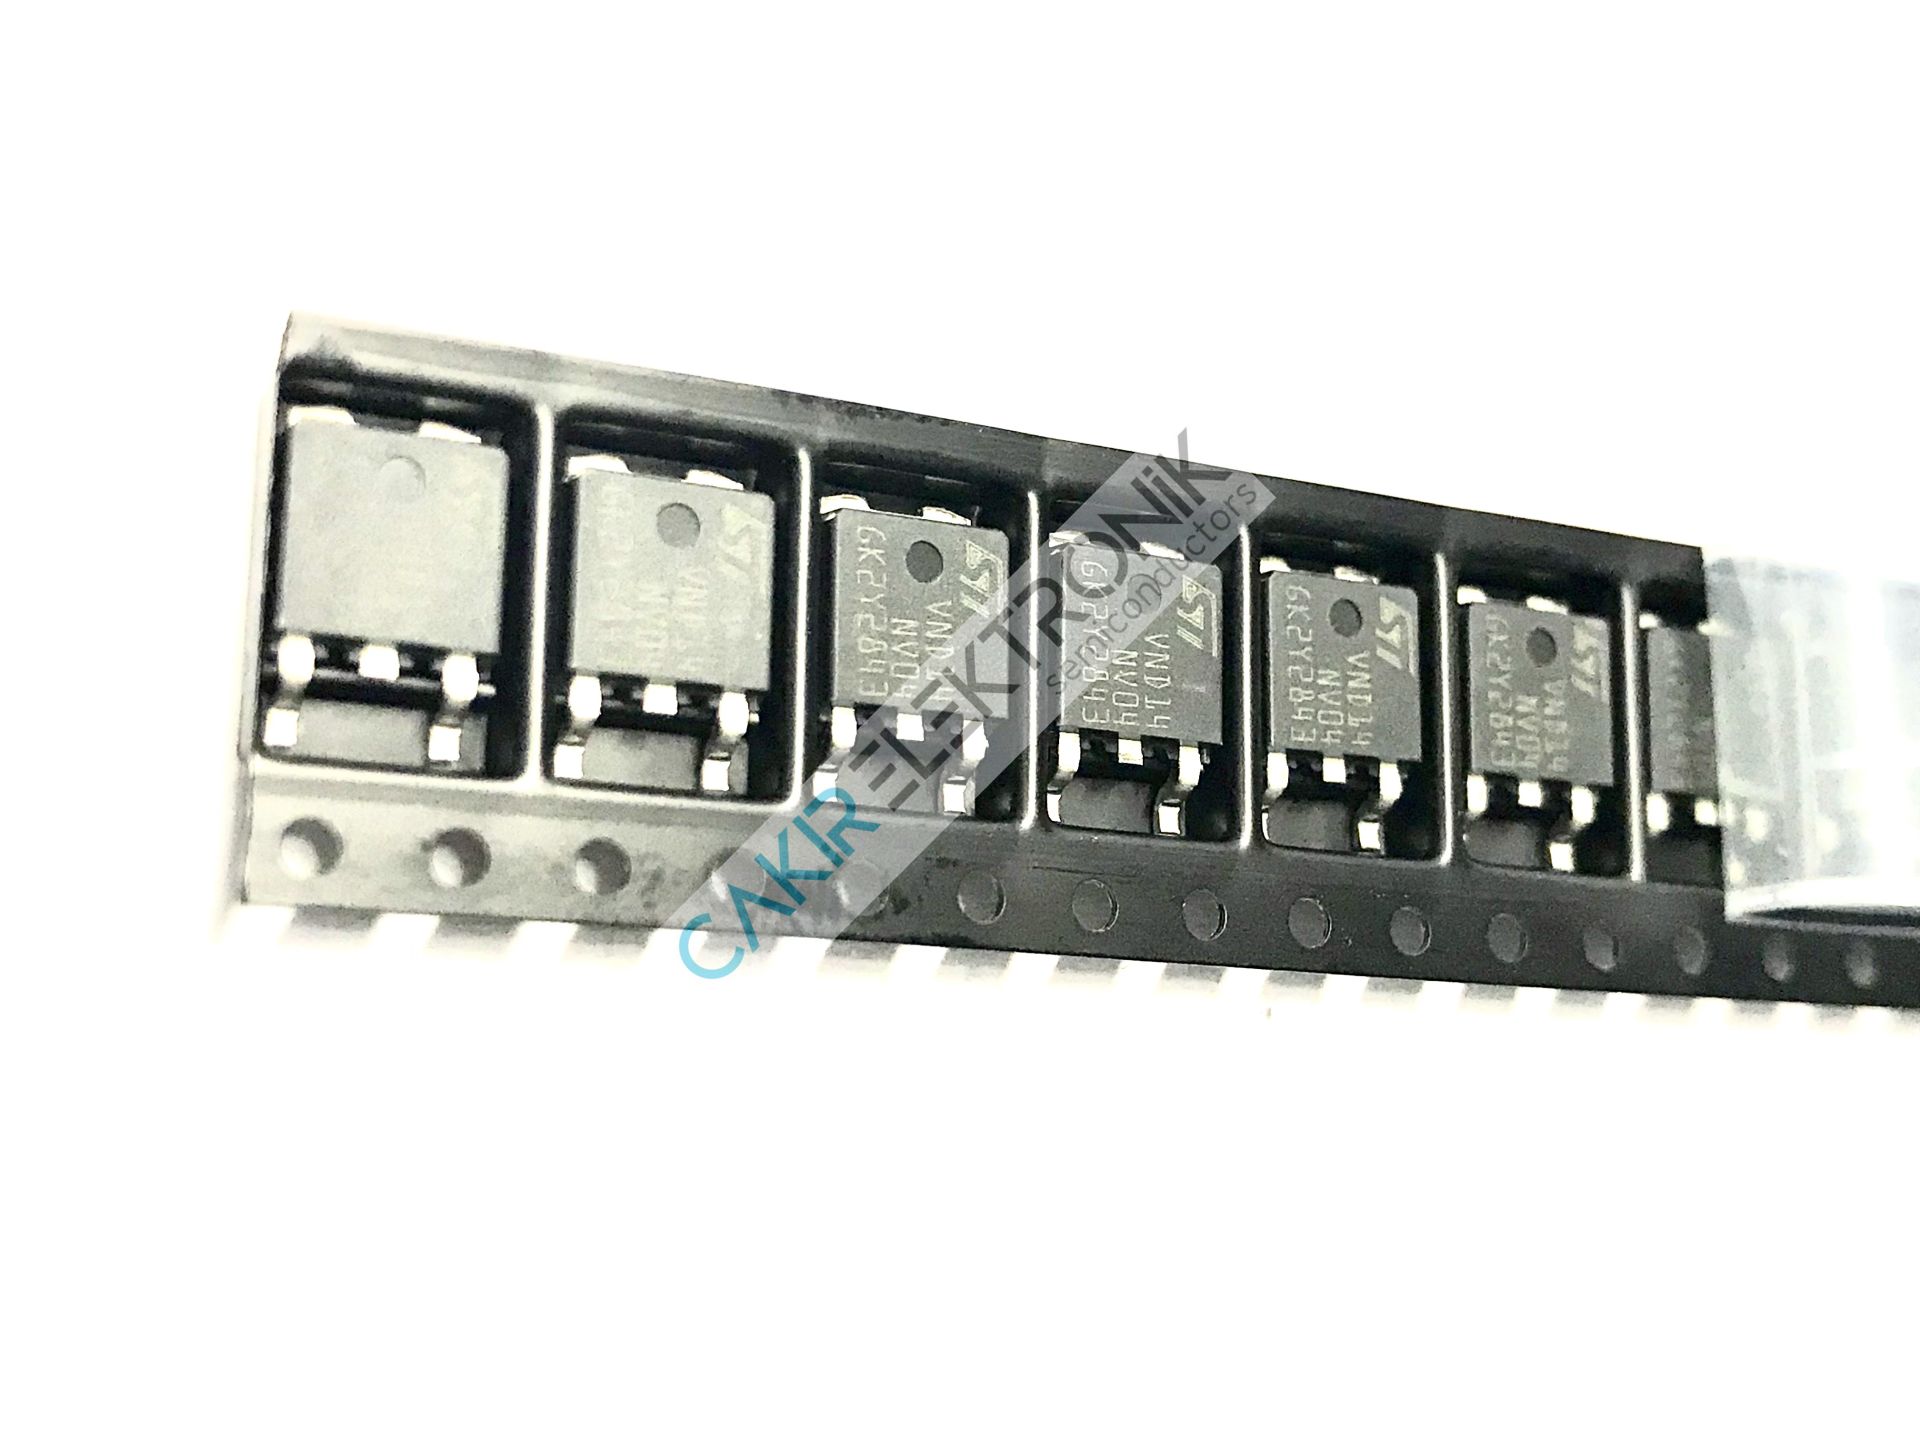 VND14NV04TR - VND14NV04 - TO252 - 12A. 40V.  fully autoprotected Power MOSFET